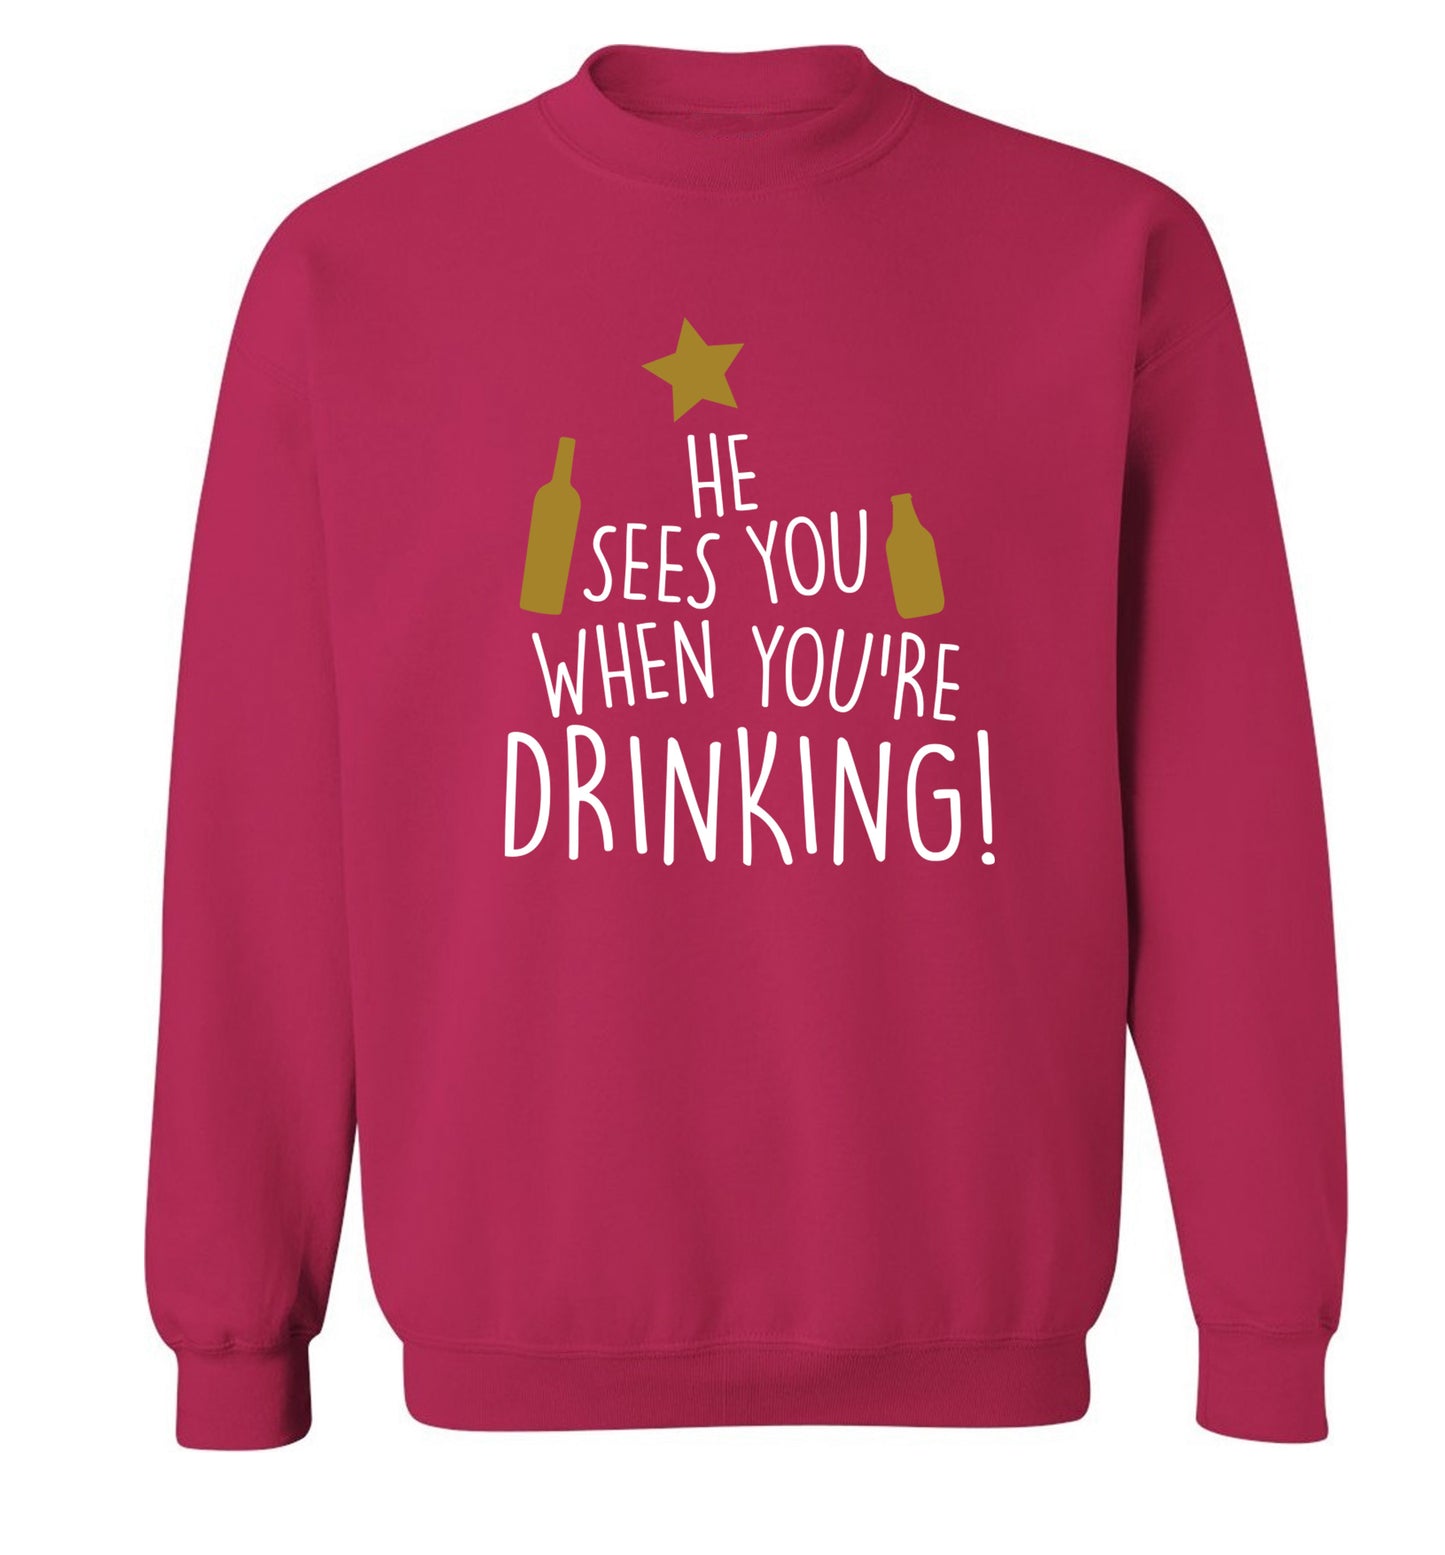 He sees you when you're drinking Adult's unisex pink Sweater 2XL